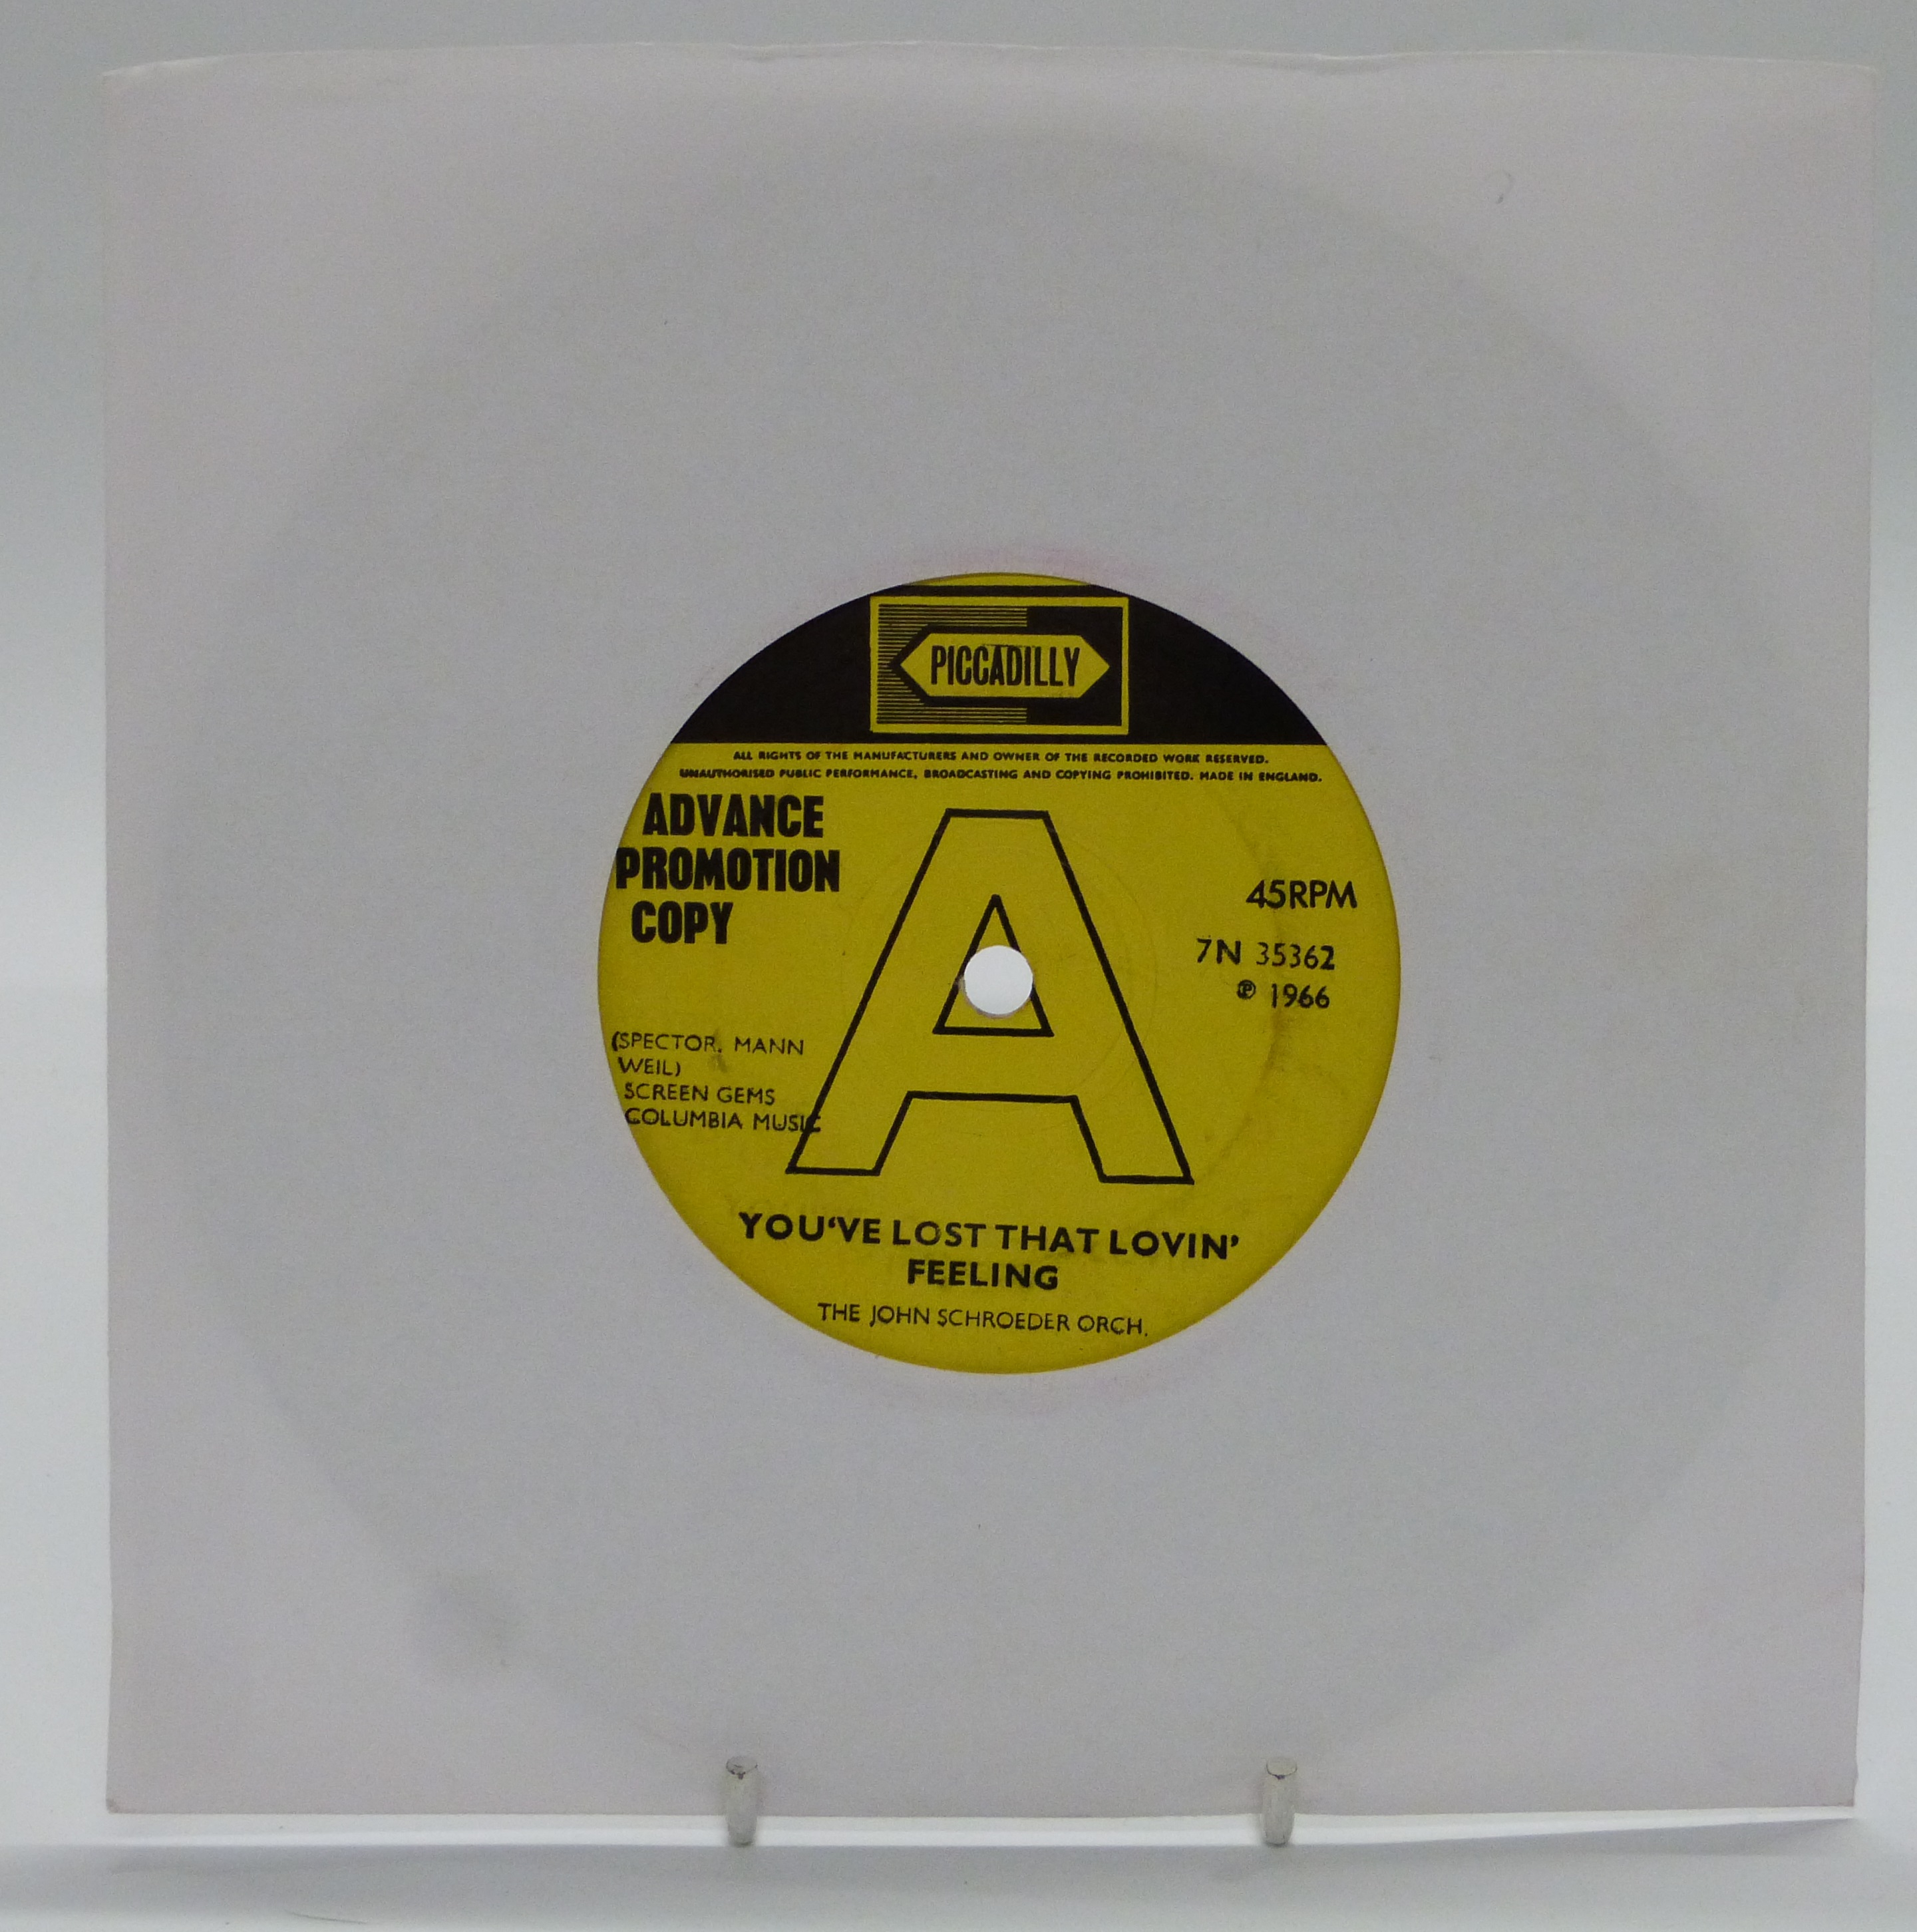 The John Schroeder Orchestra -You've Lost That Lovin' Feeling (7n 35362) demo, appears EX